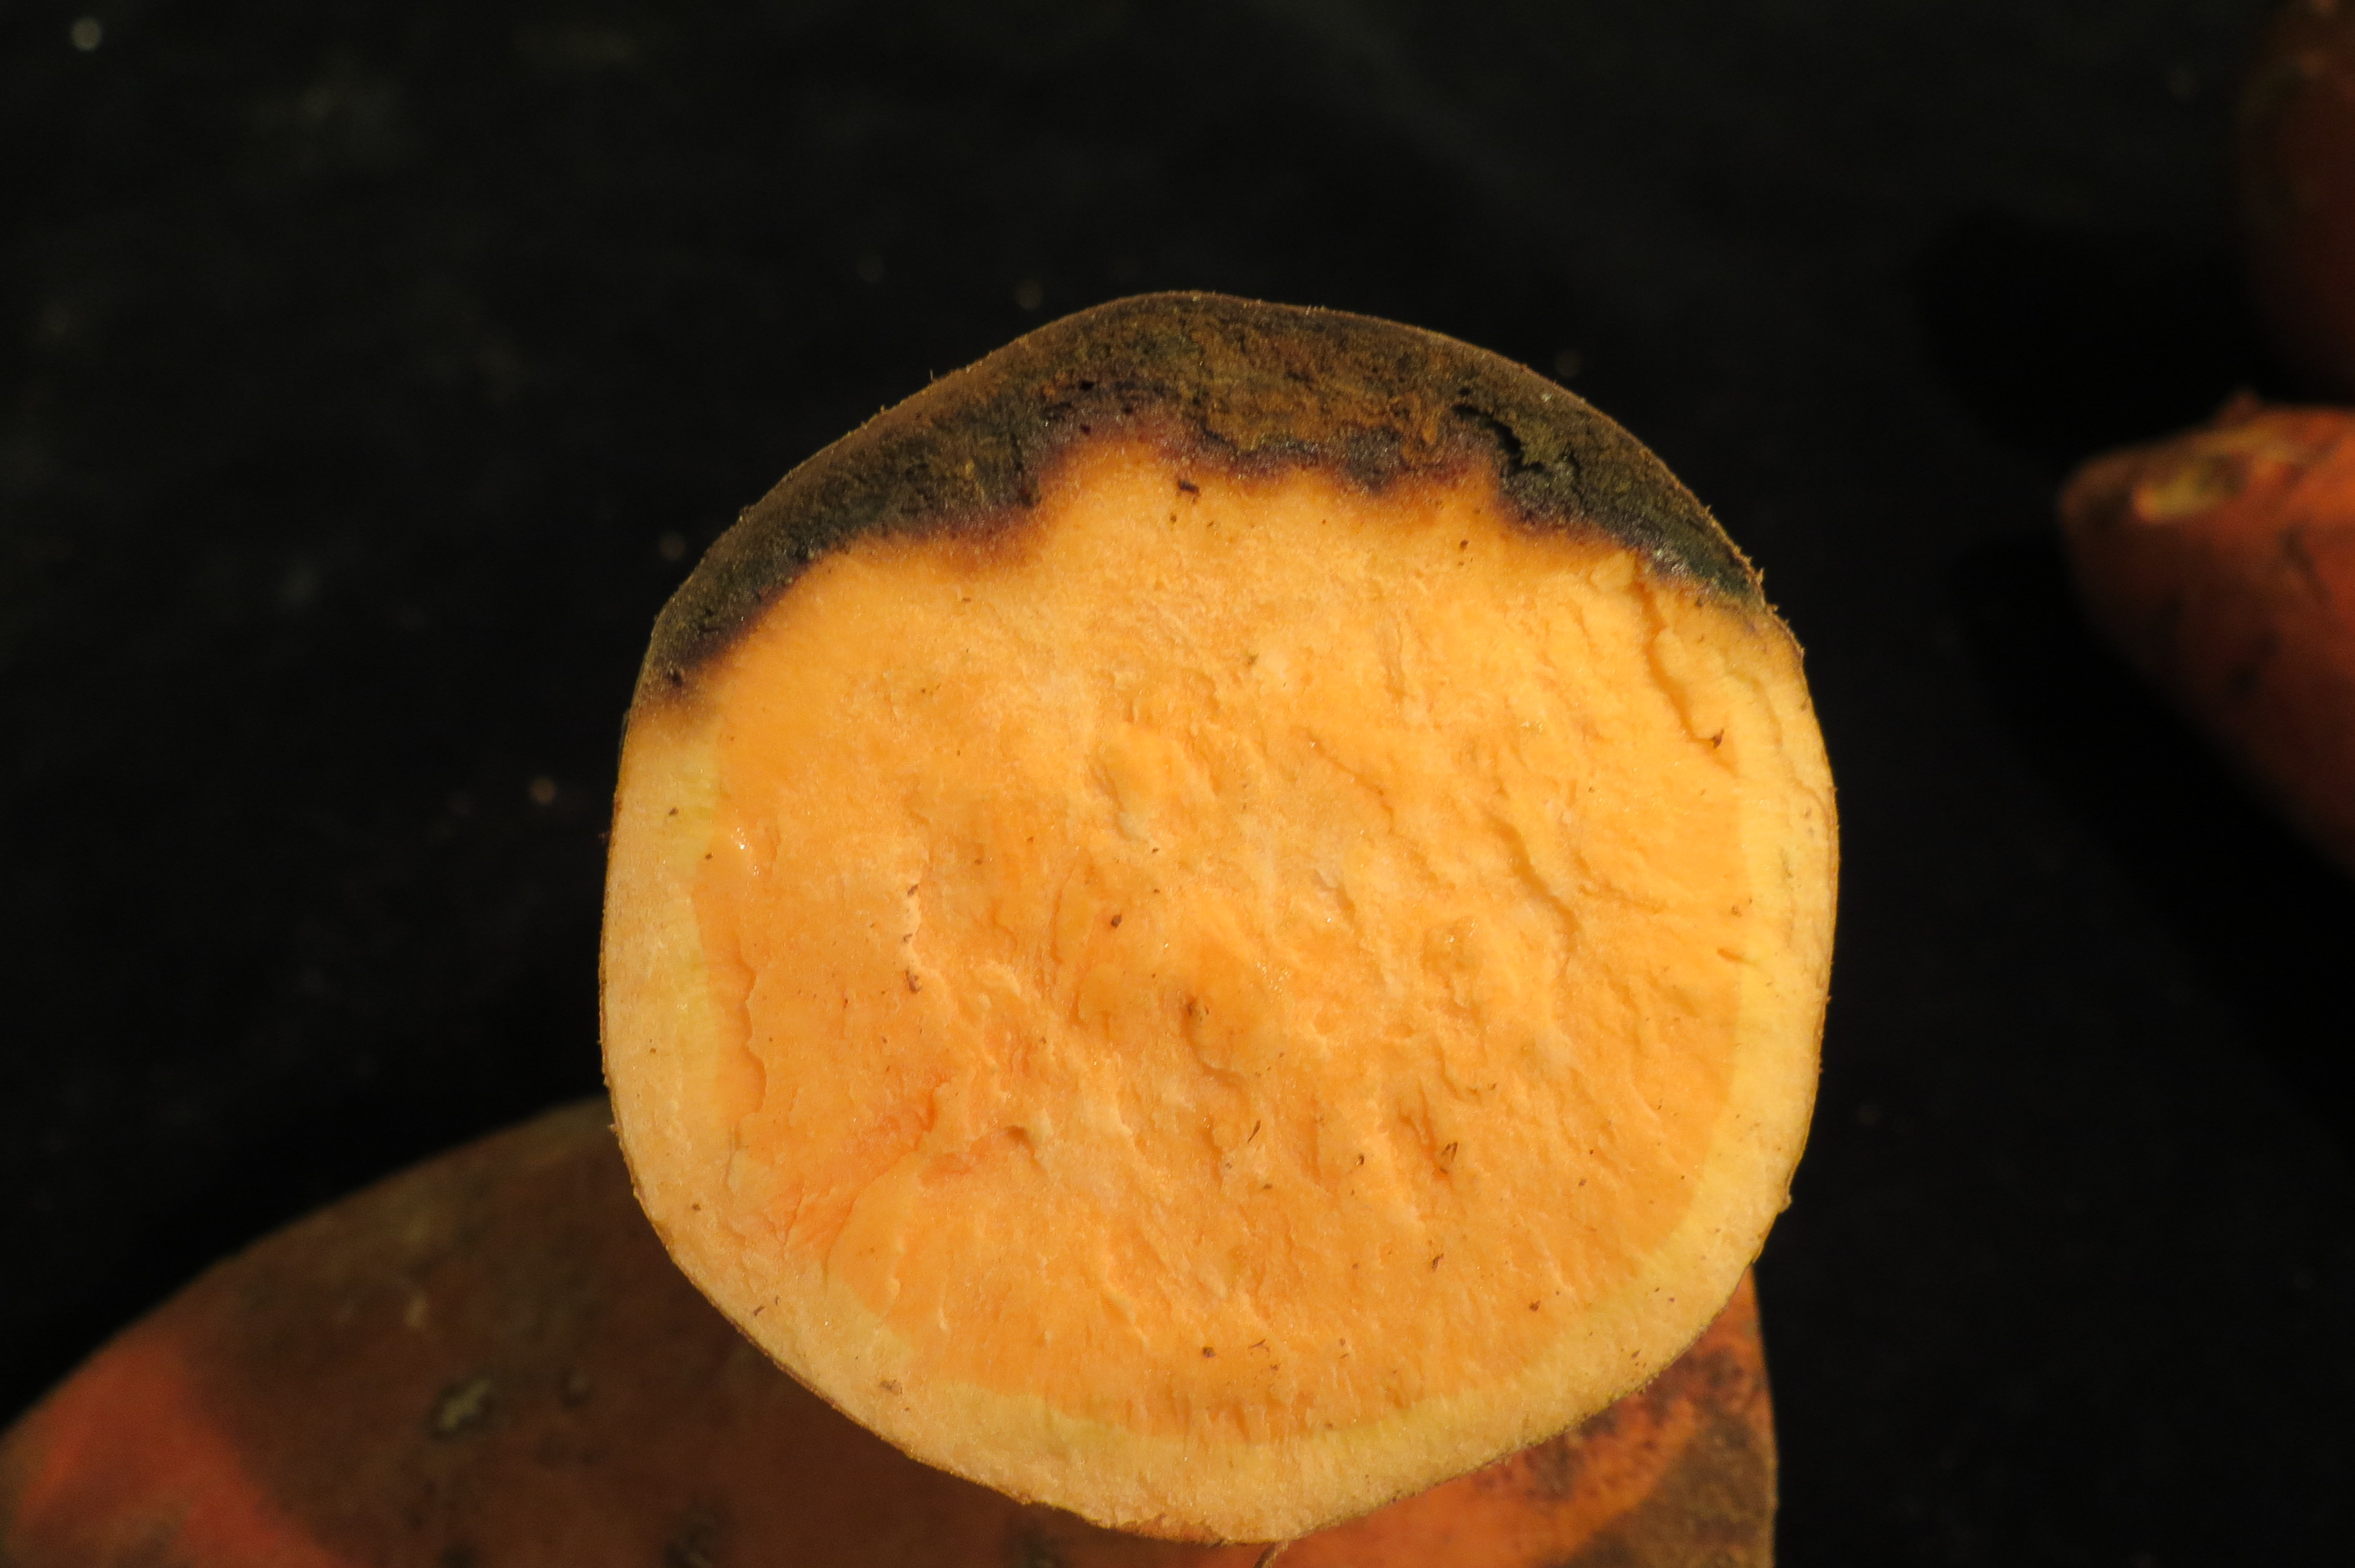 Black rot typically does not extend past the vascular tissue into the inner cortex of the sweetpotato.